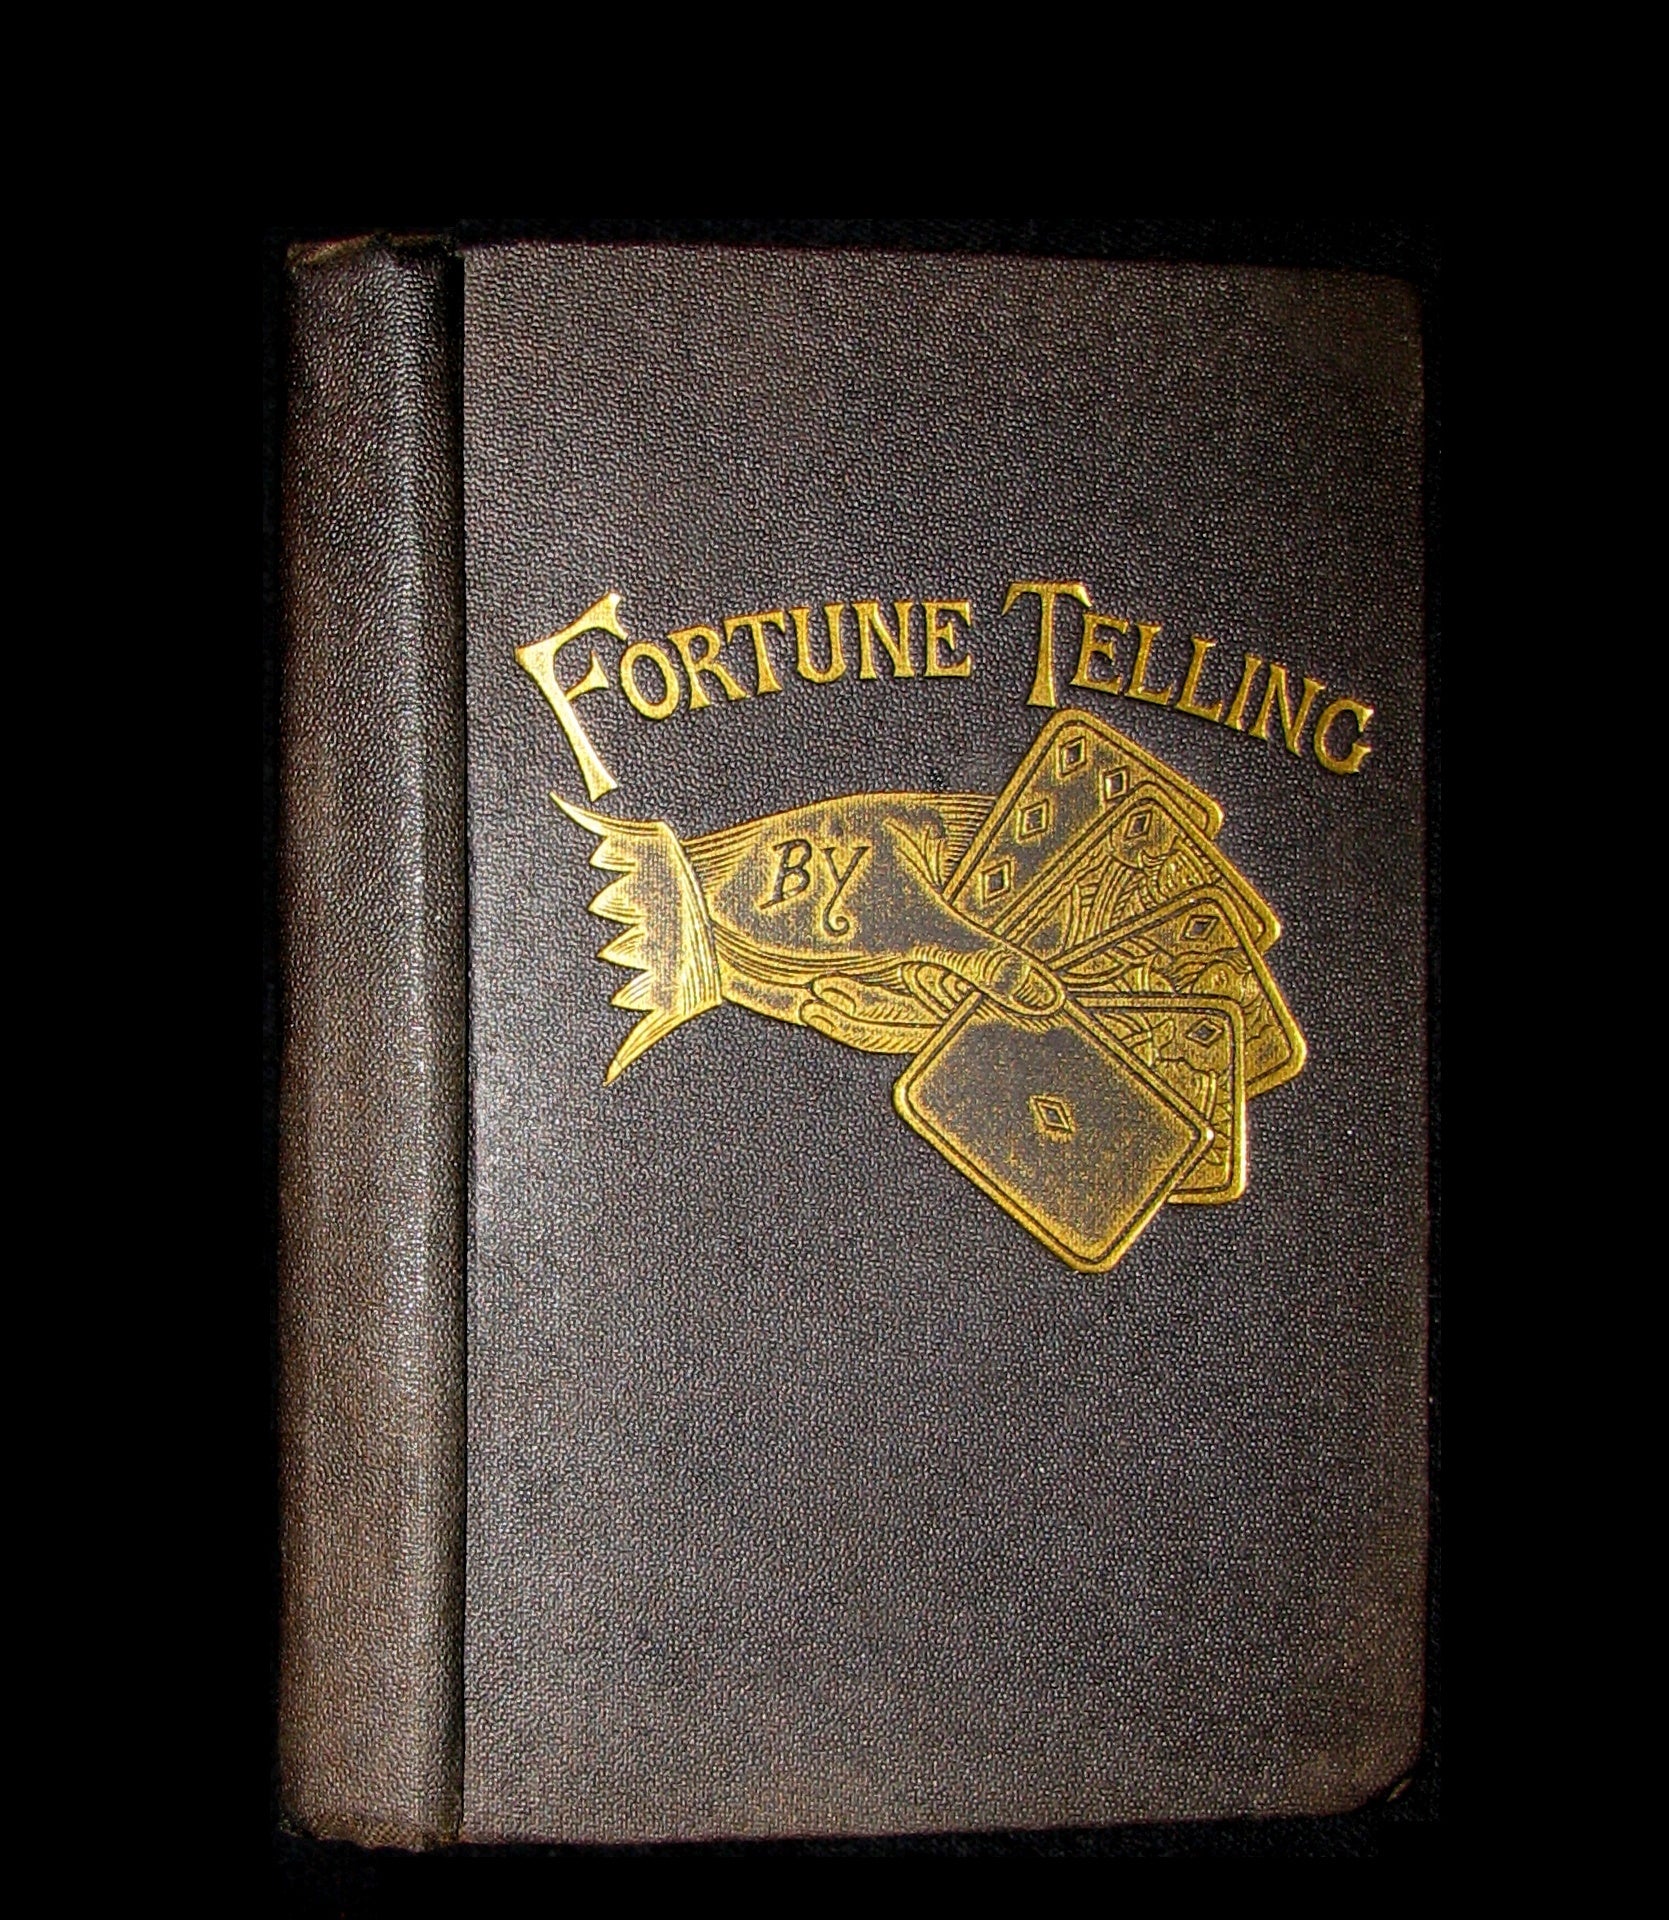 1870 Scarce Book - Fortune-Telling by Cards and Fortune-Telling Dream-Book.